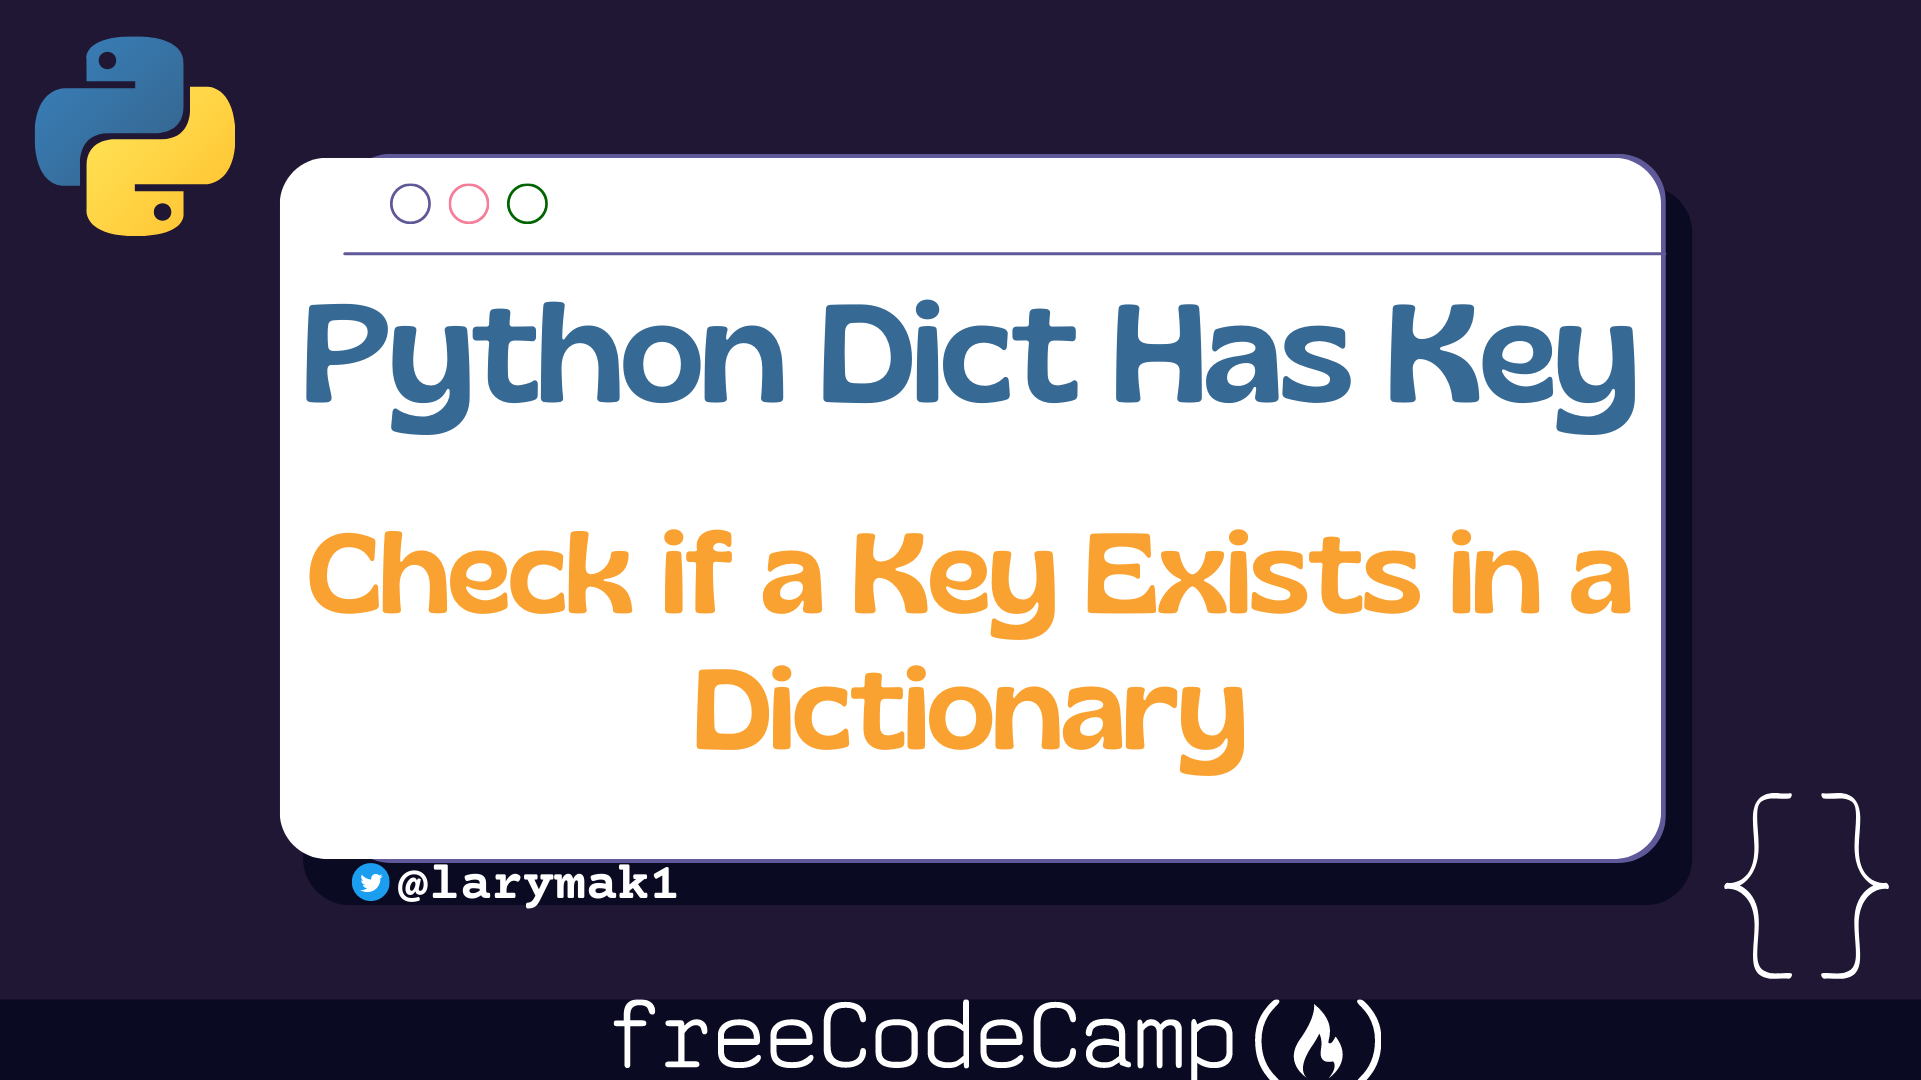 How to Check if a Key Exists in a Dictionary in Python – Python Dict Has Key